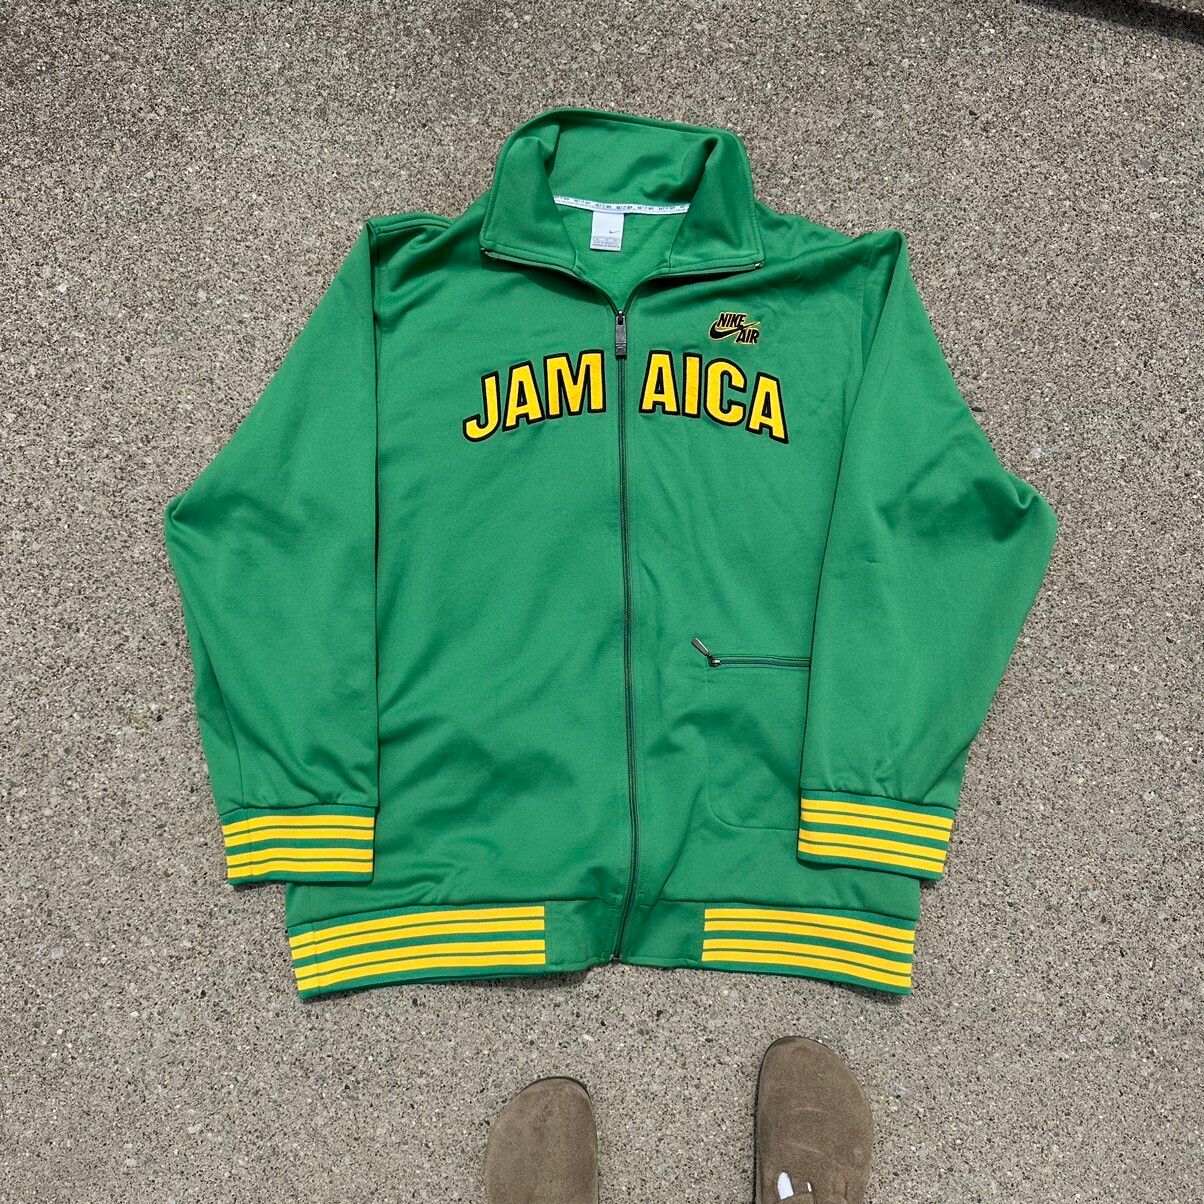 Nike Vintage Nike Air Jamaica zip up Size US XL / EU 56 / 4 - 1 Preview